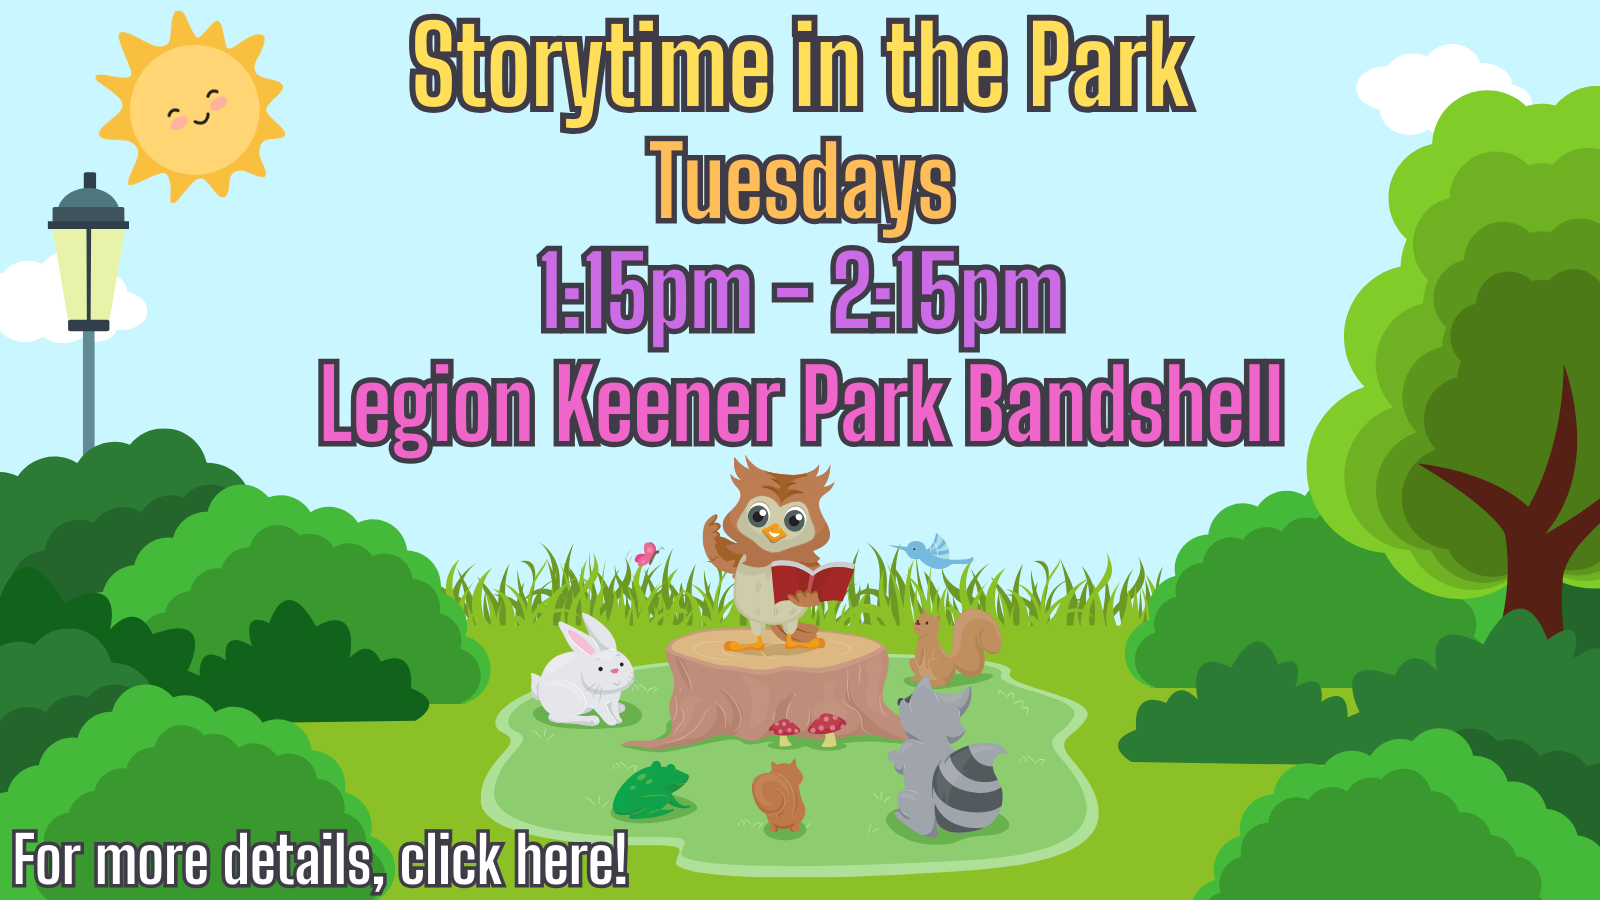 "Storytime, in the park, I think it was for June & July!"